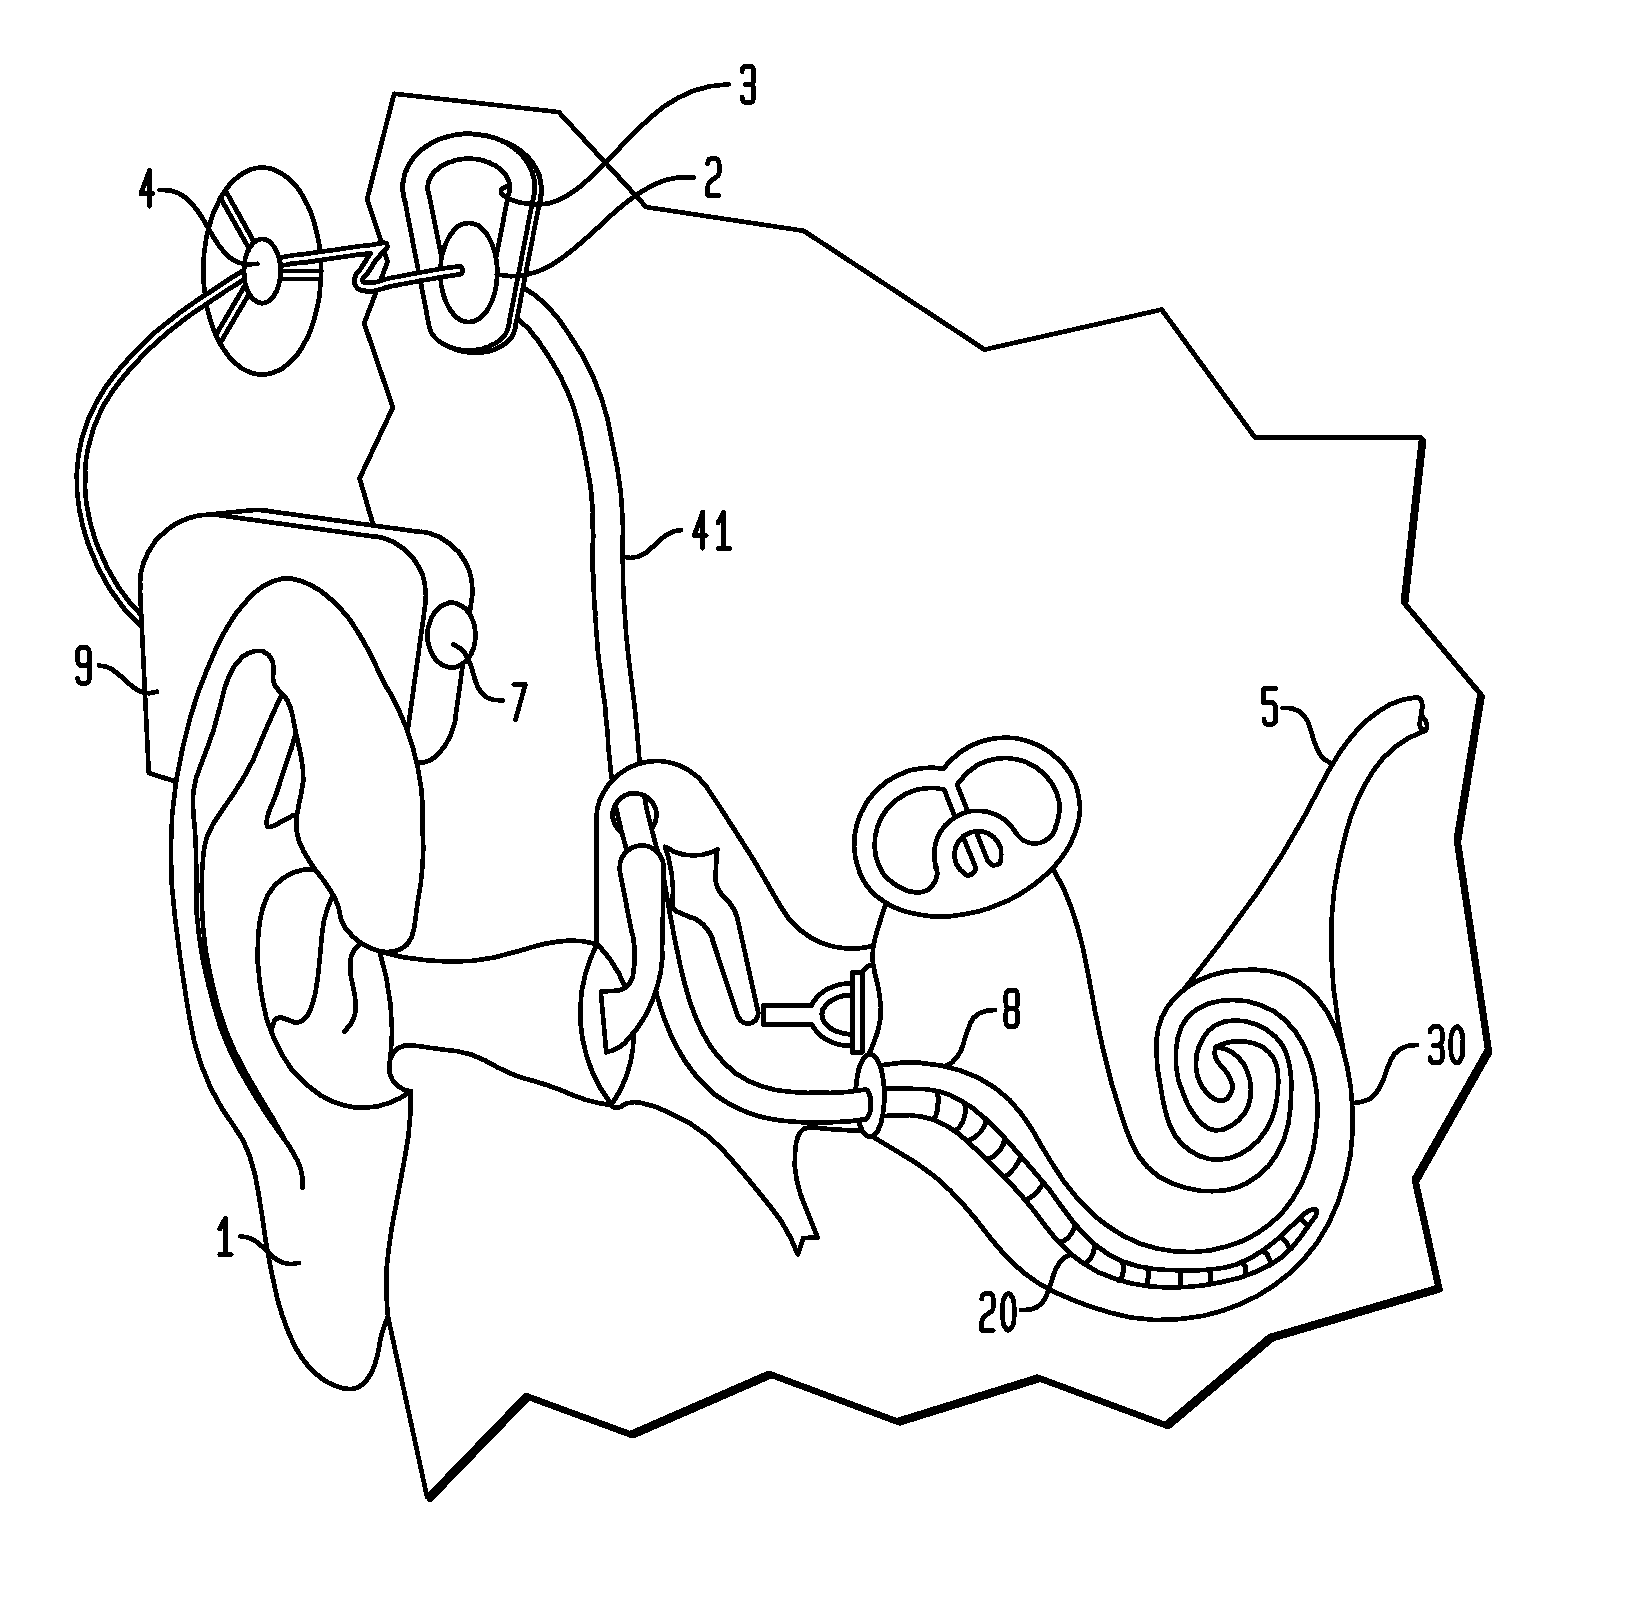 Apparatus for delivery of pharmaceuticals to the cochlea